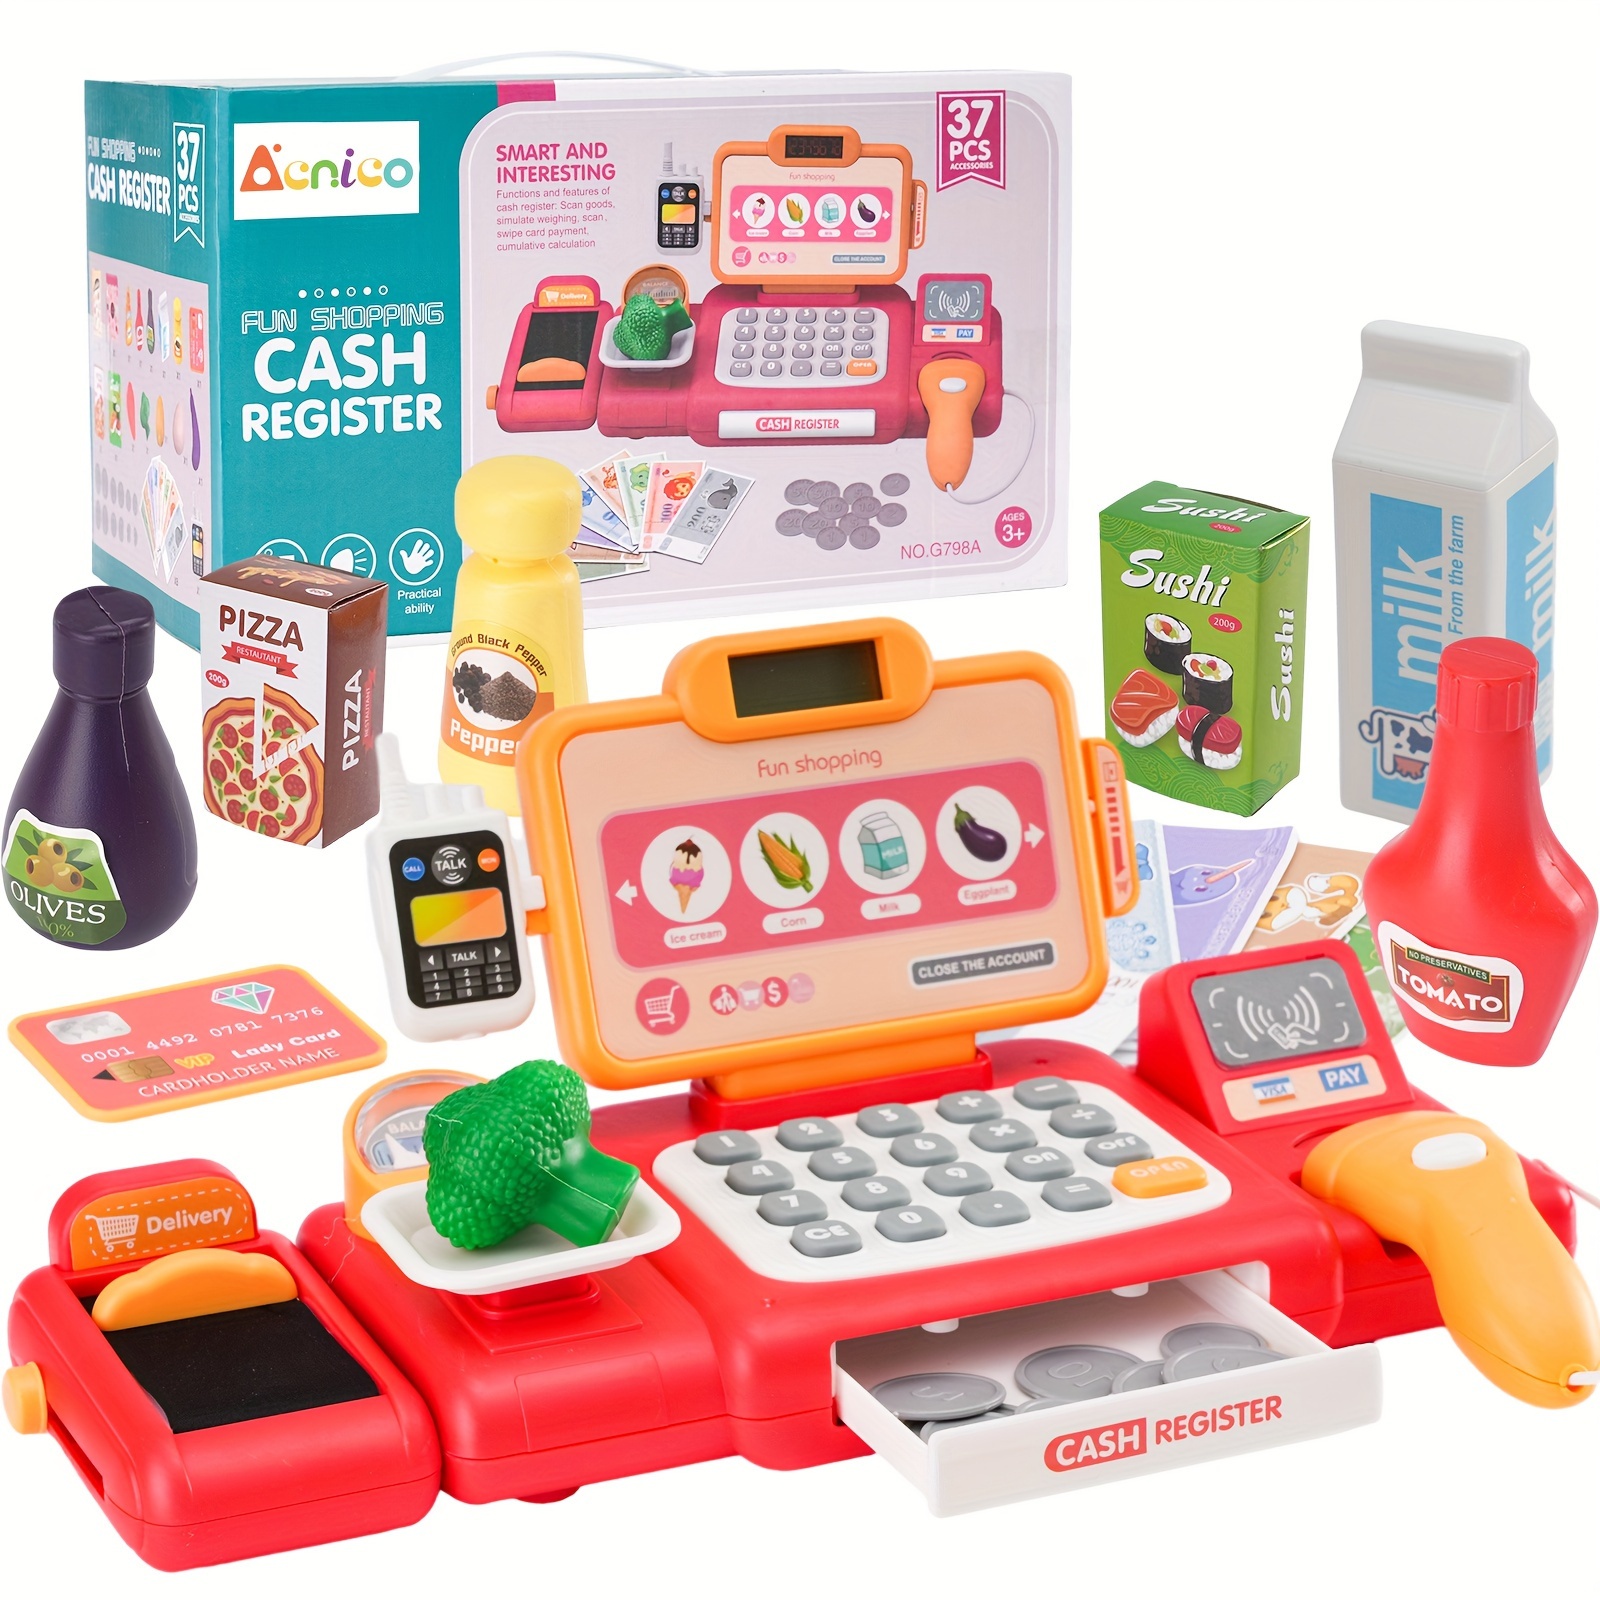 

Cash Register Toy Playset, 37 Pcs Pretend Play Money, Shopping Kids Cash Register With Scanner, Calculator, Microphone, Credit Card, Weigher, , Play Food, Gift For Ages 3+ Boys Girls